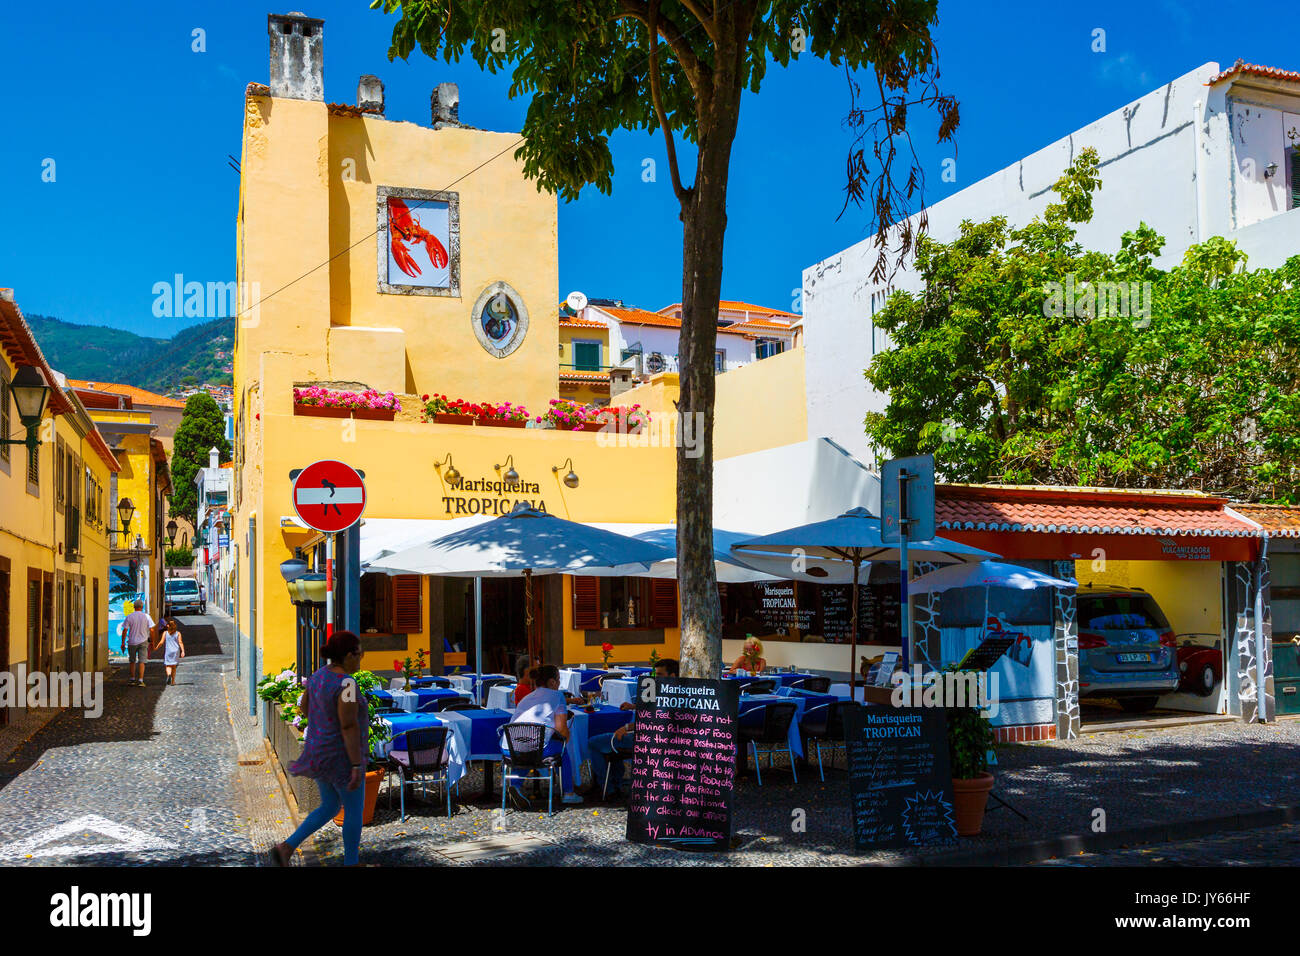 Restaurant in Old quarter. Funchal, Madeira, Portugal, Europe. Stock Photo